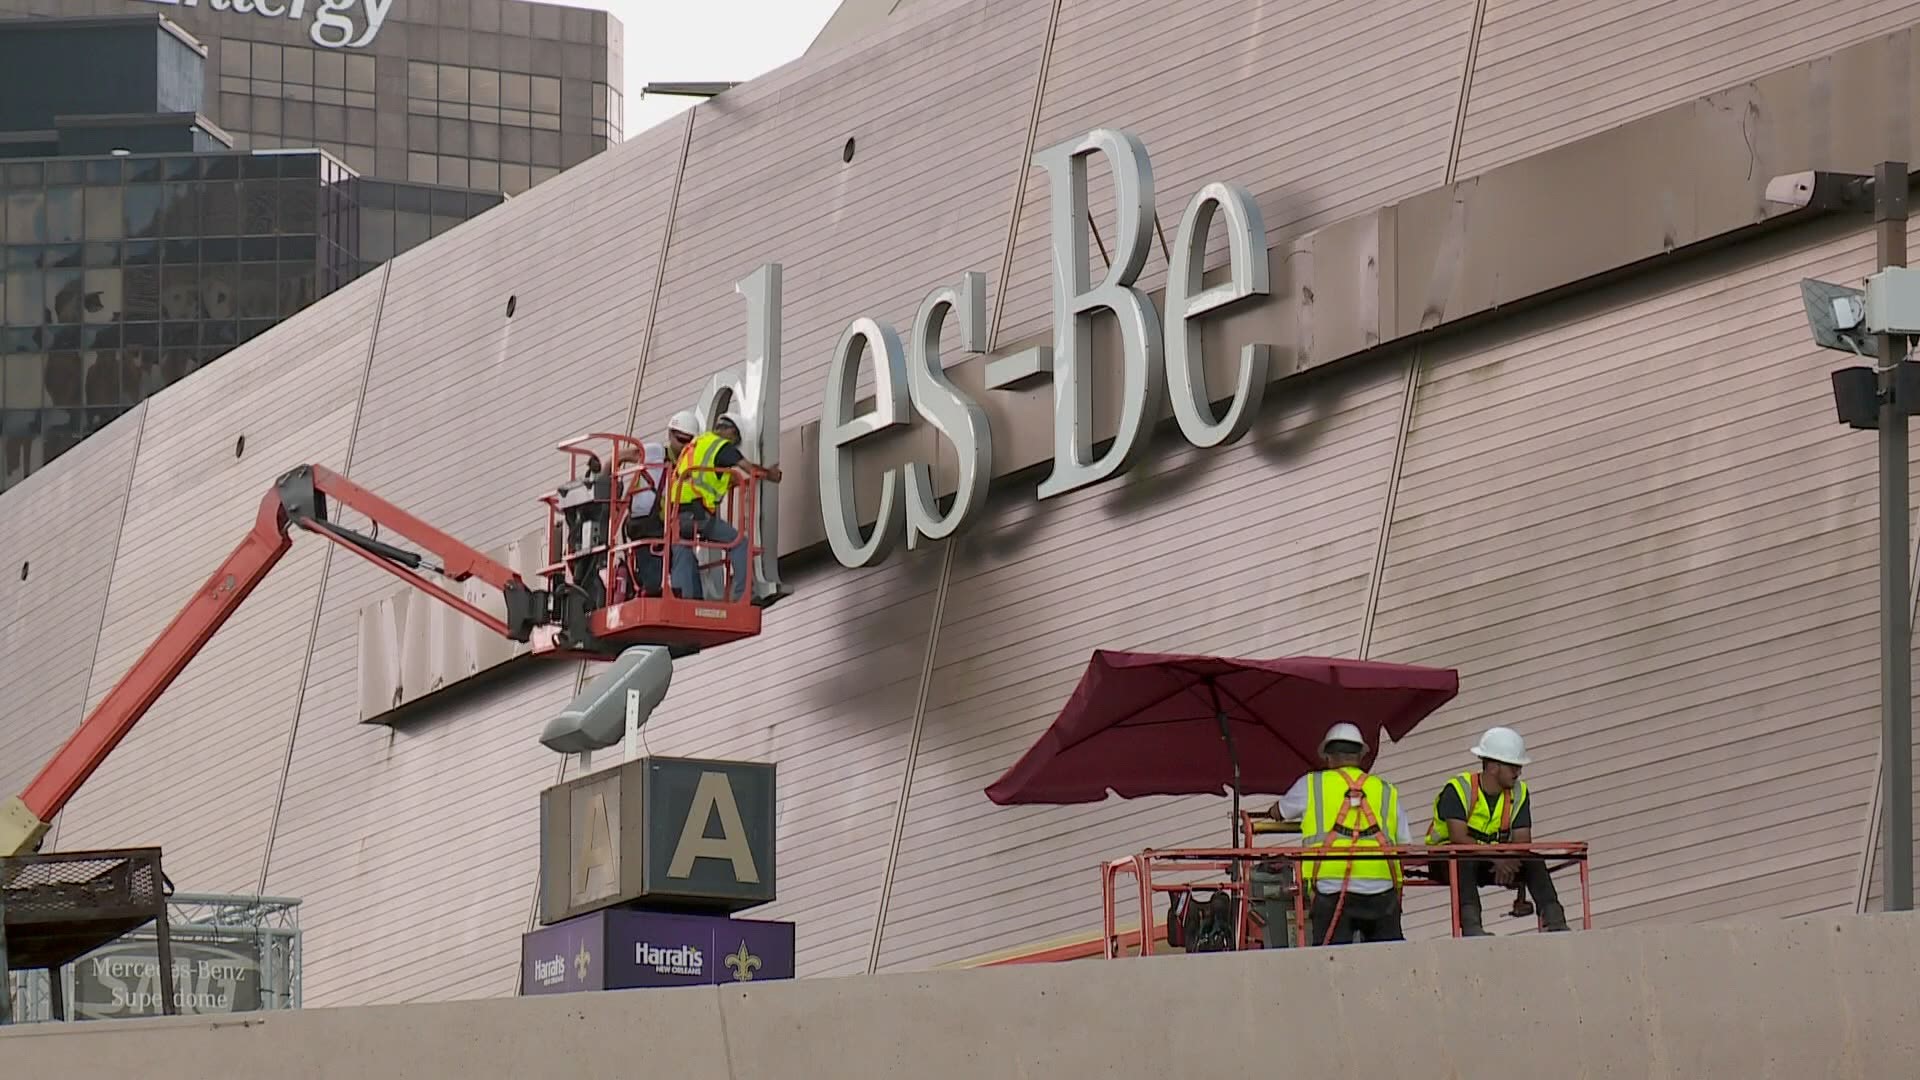 The renaming process has begun for the Superdome as the "Mercedes Benz" was taken off the building.